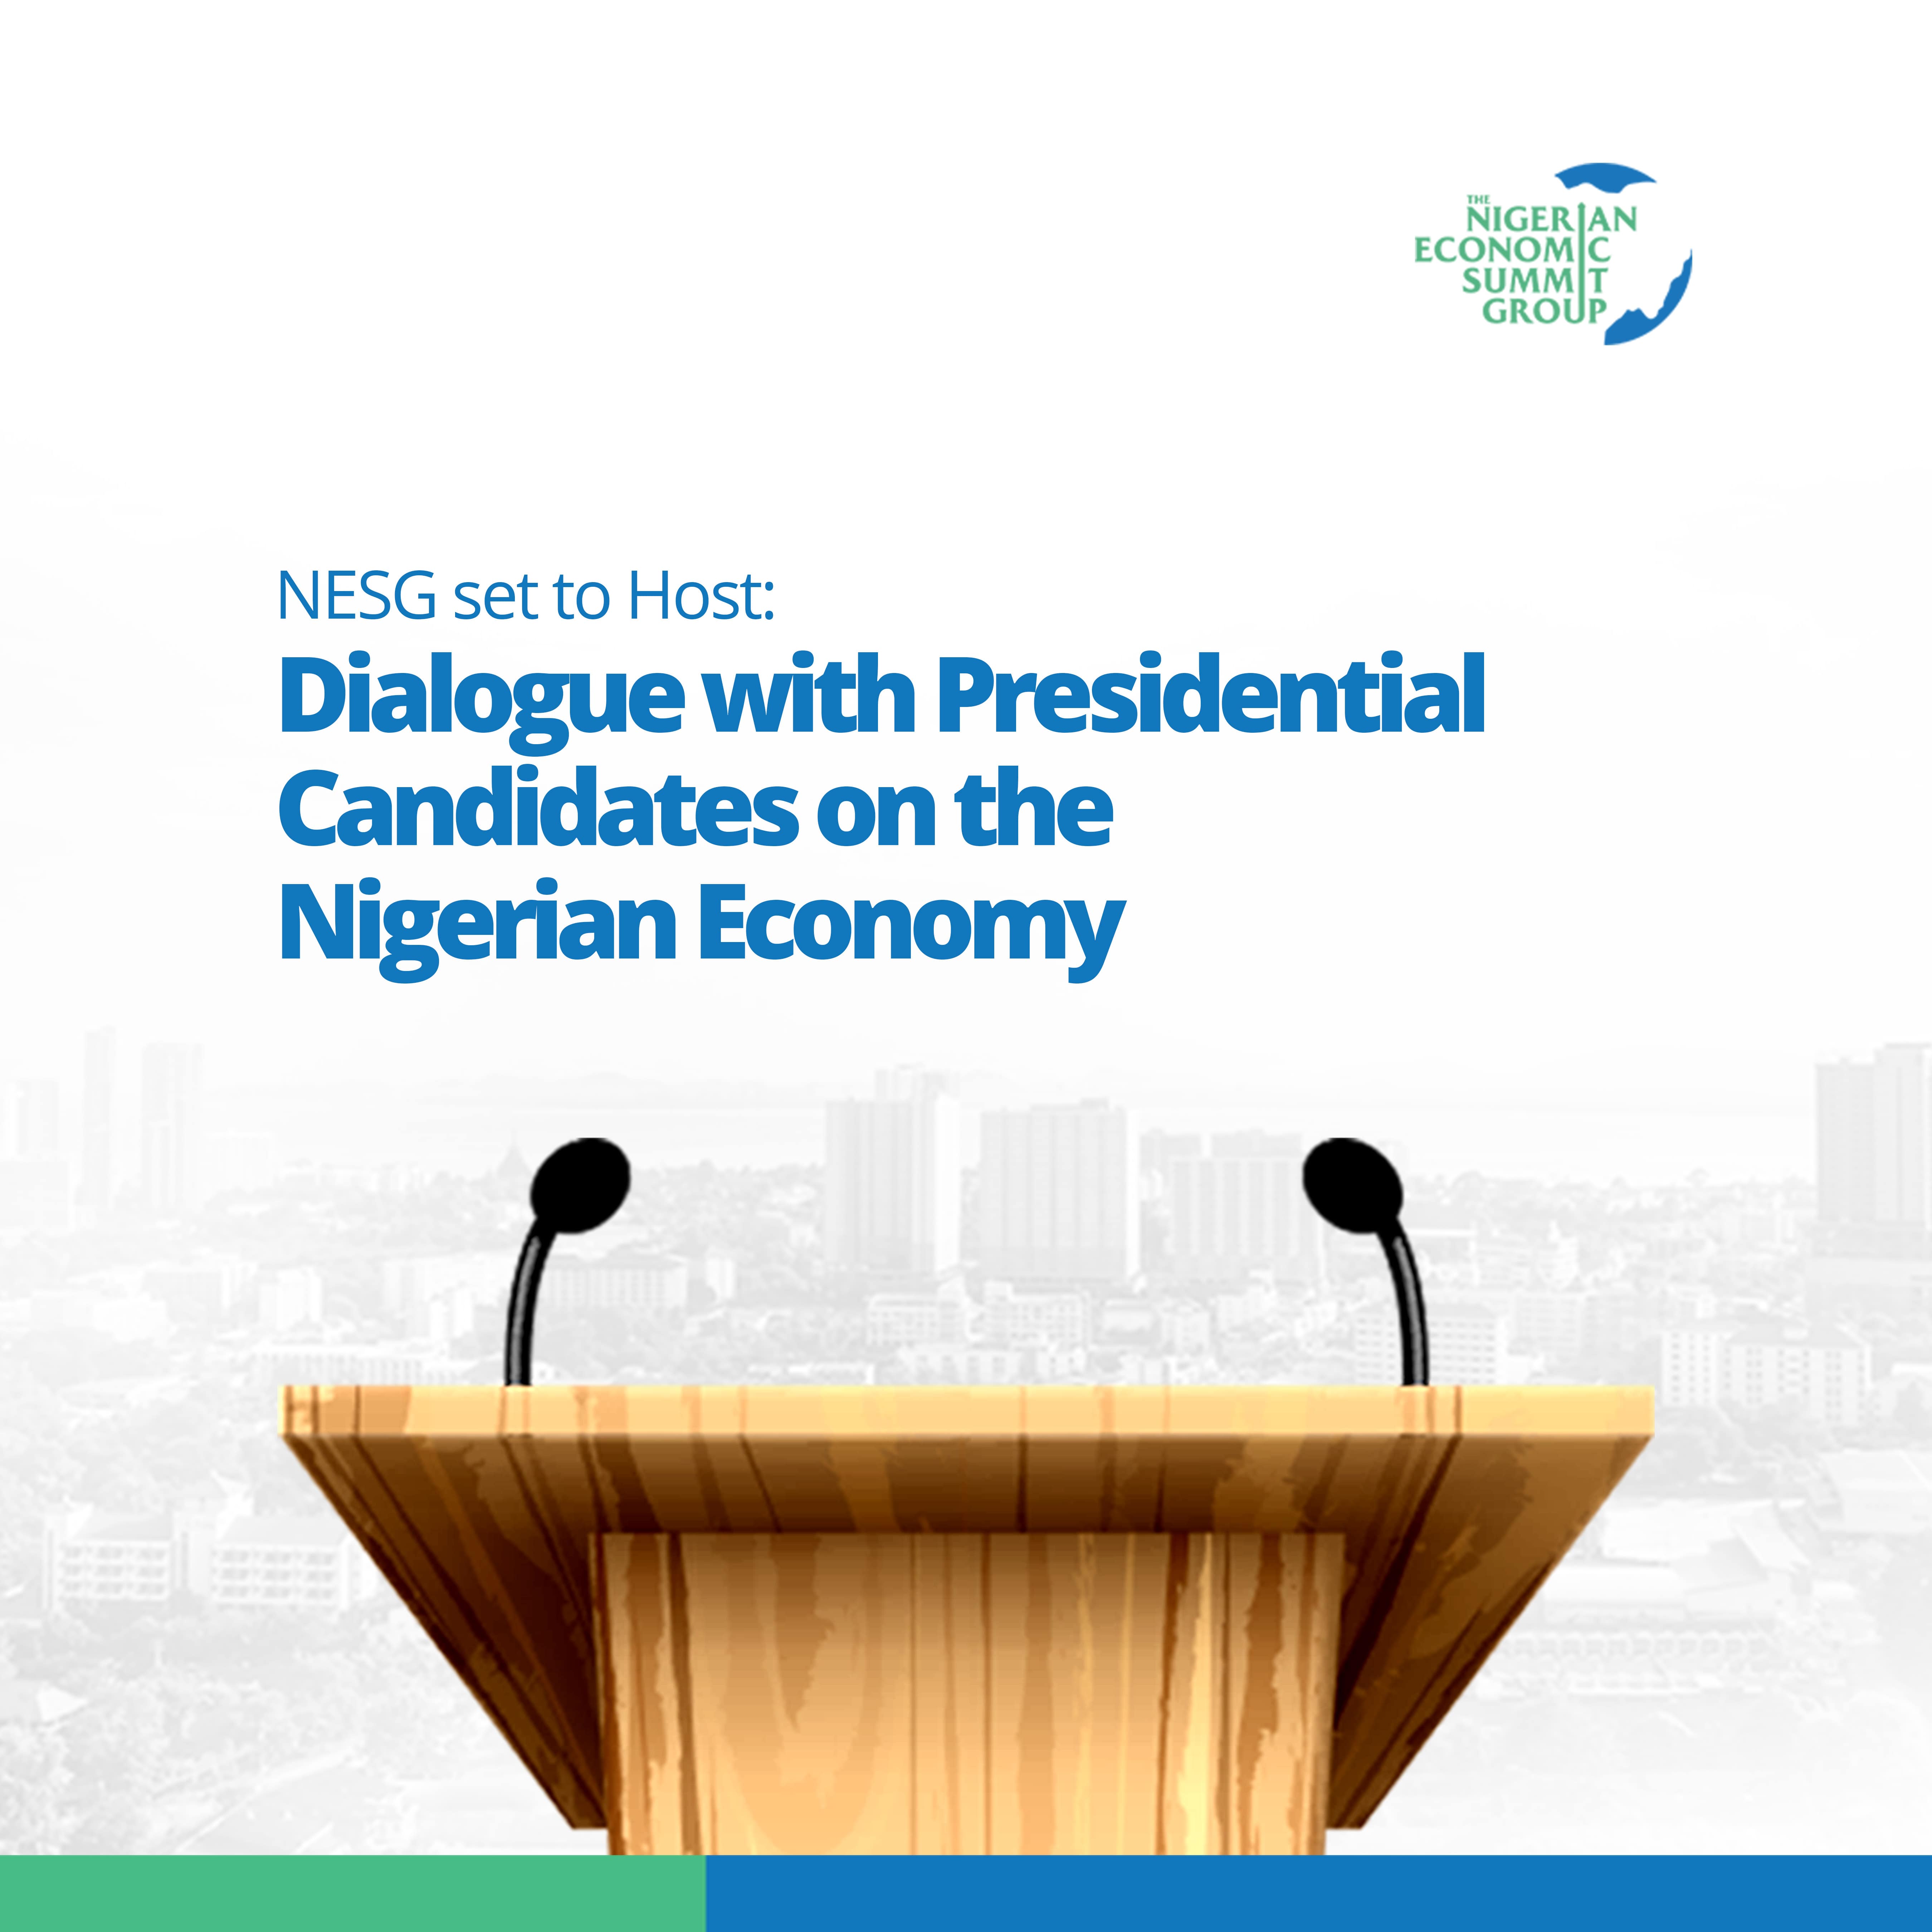 NESG set to Dialogue with Presidential Candidates on the Nigerian Economy